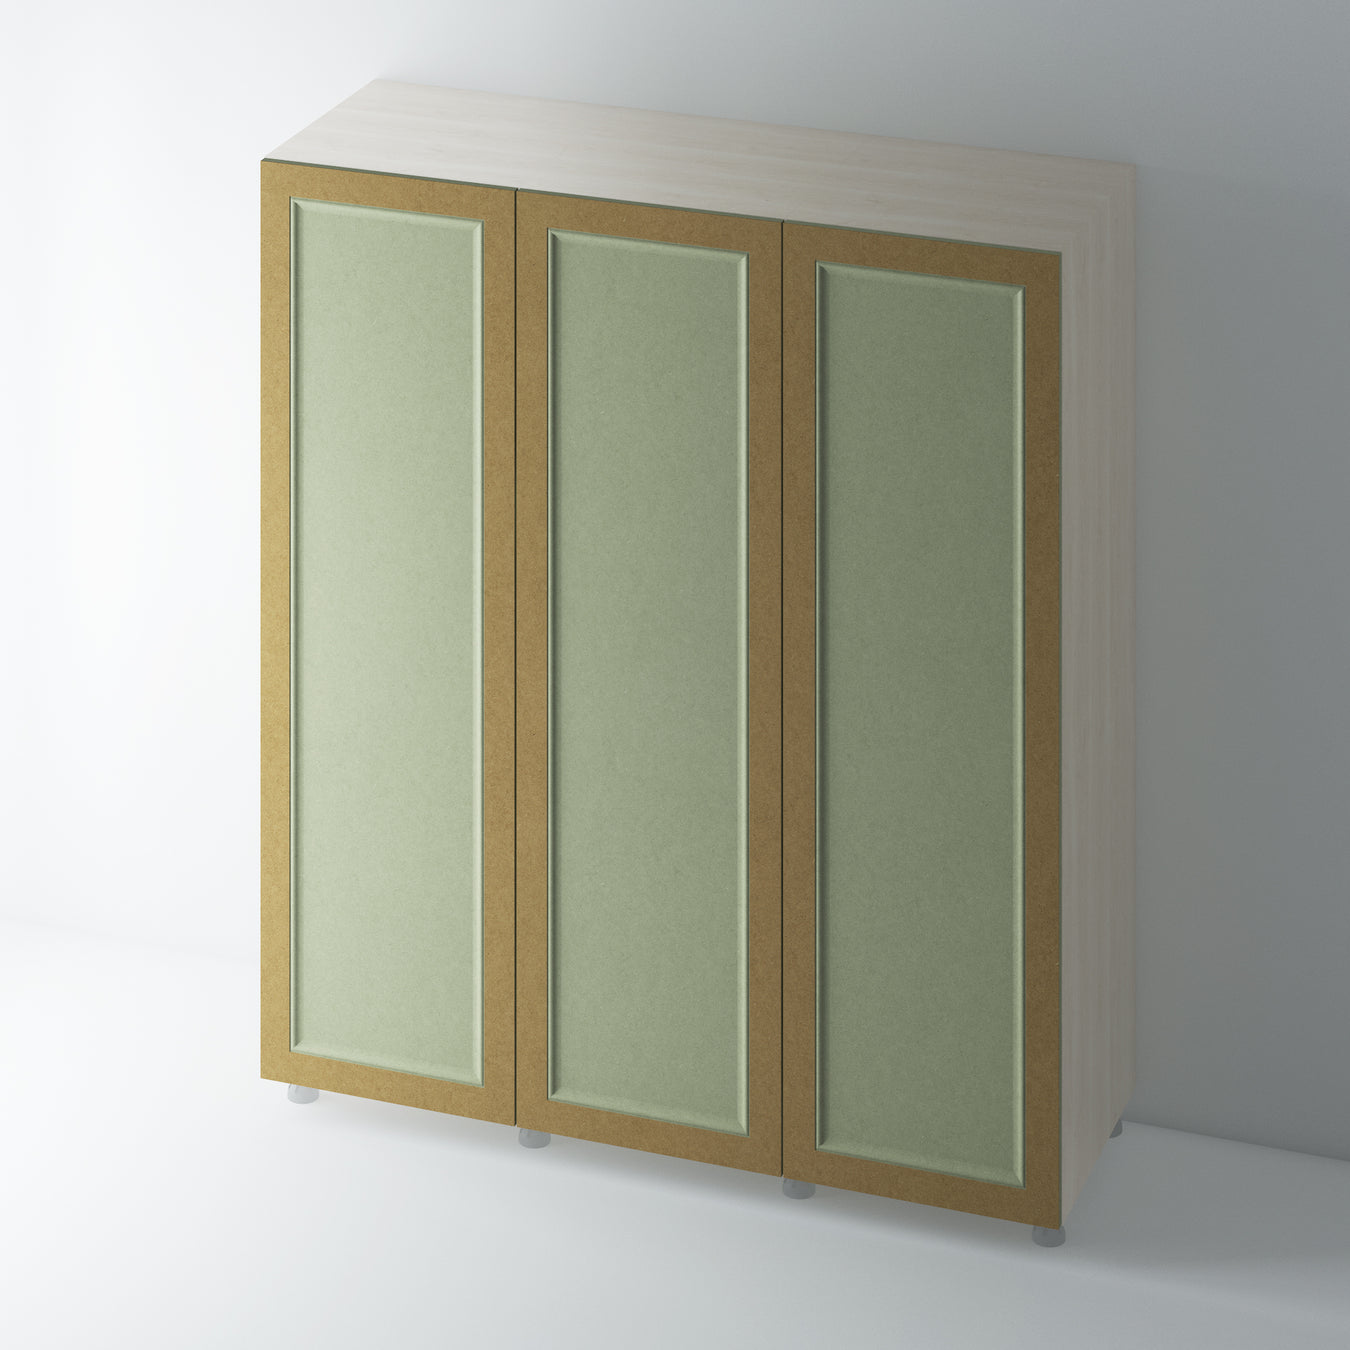 Bare Shaker Wardrobe with Ogee Mouldings